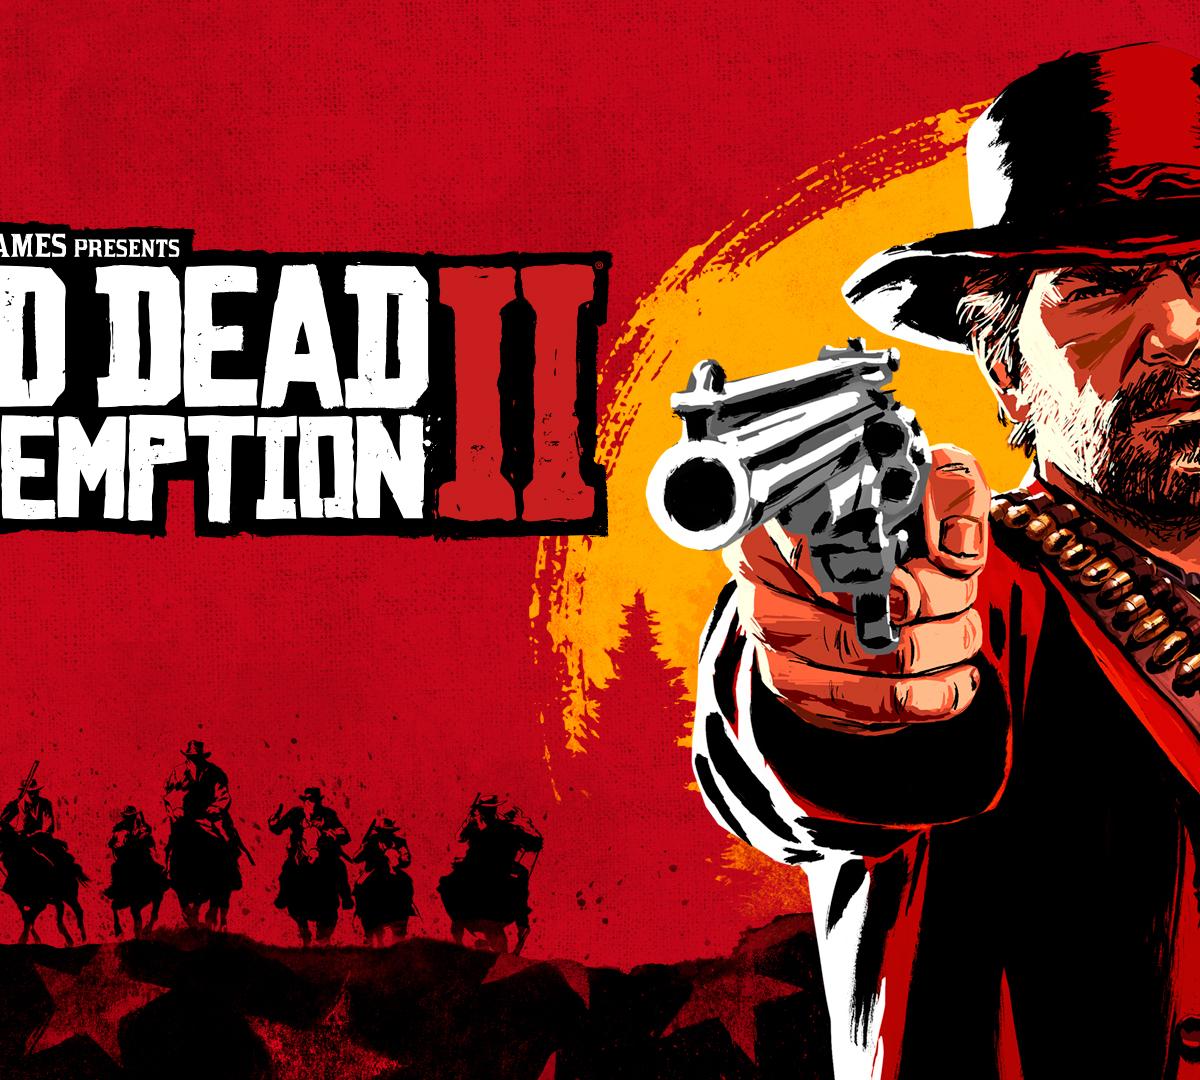 Red Dead Redemption 2 Review: Gameplay Impressions and Speedrunning Tips,  Appeal, News, Scores, Highlights, Stats, and Rumors